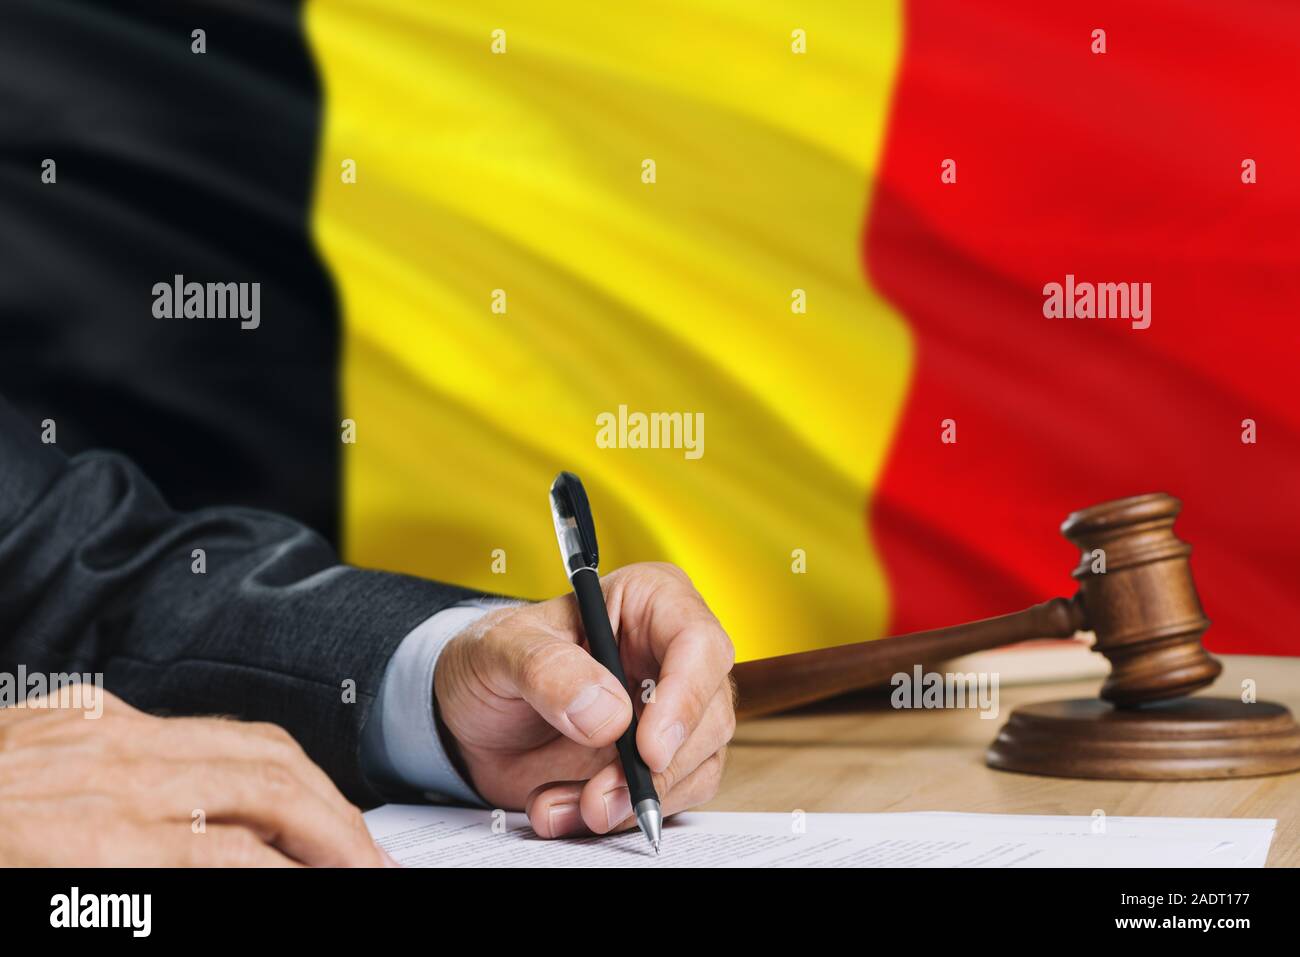 Judge writing on paper in courtroom with Belgium flag background. Wooden gavel of equality theme and legal concept. Stock Photo